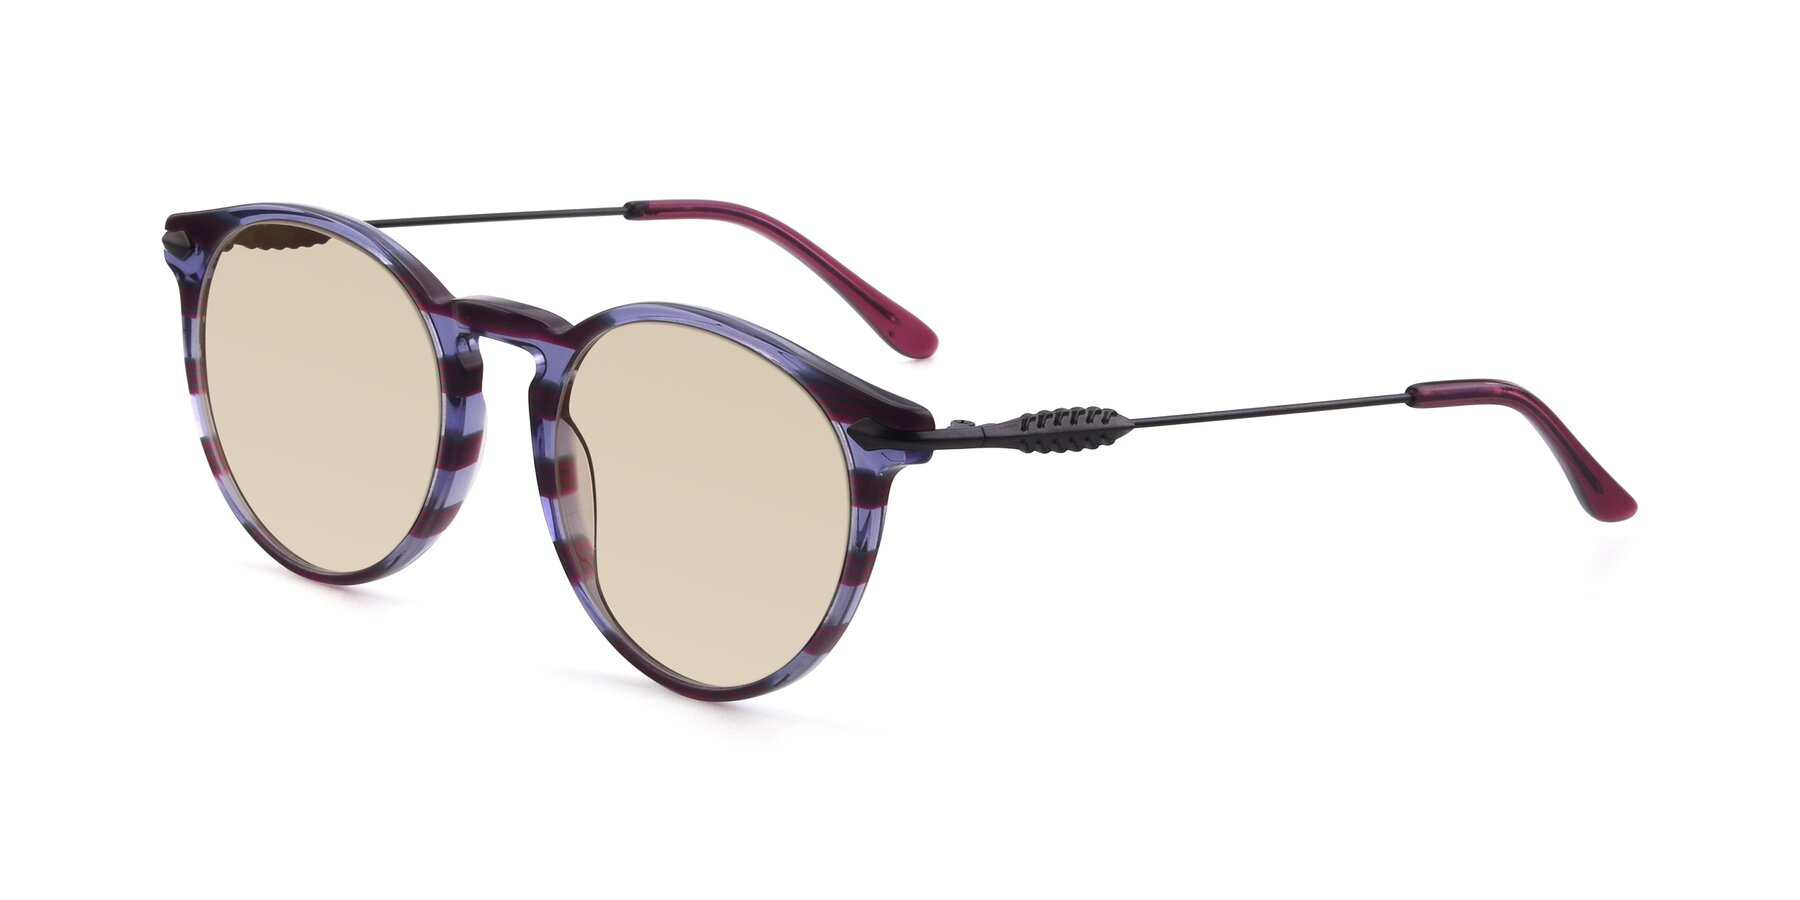 Angle of 17660 in Stripe Purple with Light Brown Tinted Lenses